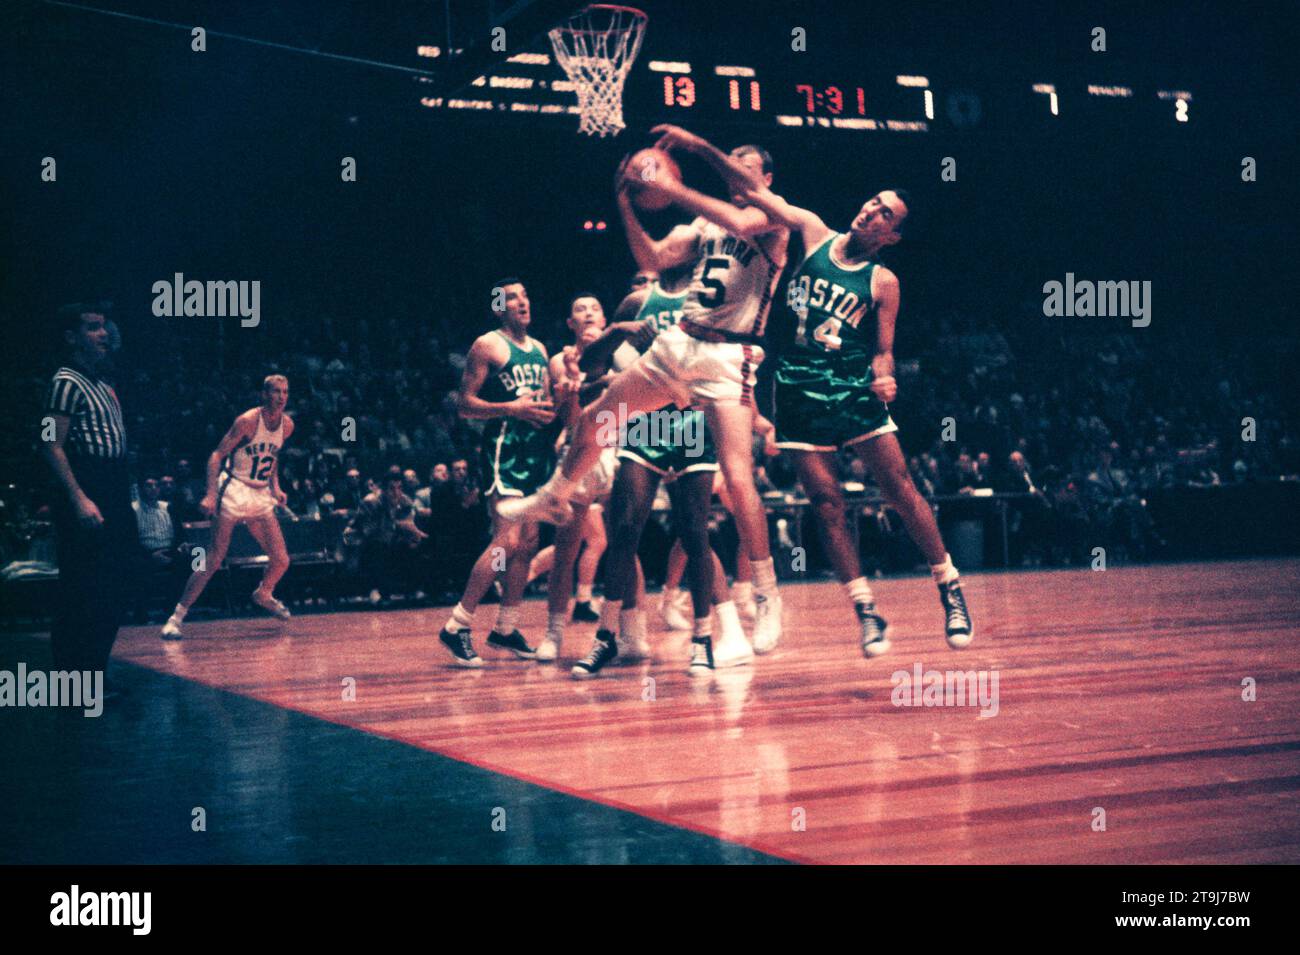 NEW YORK, NY - OCTOBER 25: Guy Sparrow #5 of the New York Knicks grabs the rebound from Bob Cousy #14 of the Boston Celtics during an NBA game on October 25, 1958 at the Madison Square Garden in New York, New York.  (Photo by Hy Peskin) *** Local Caption *** Bob Cousy;Guy Sparrow Stock Photo